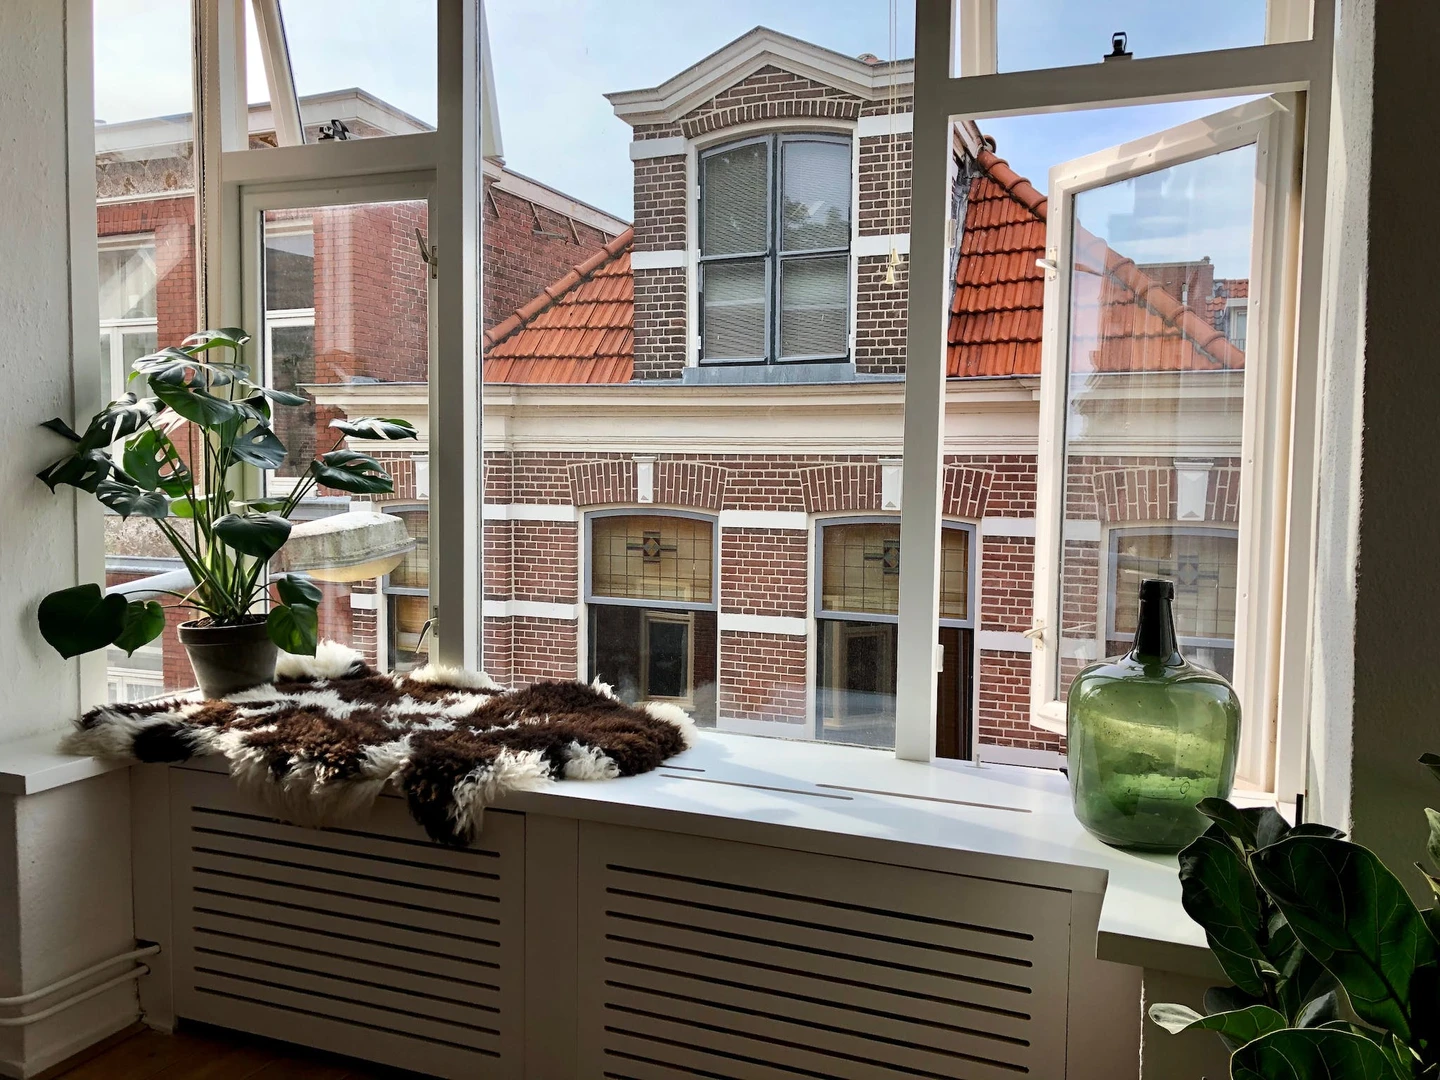 Accommodation with 3 bedrooms in Groningen